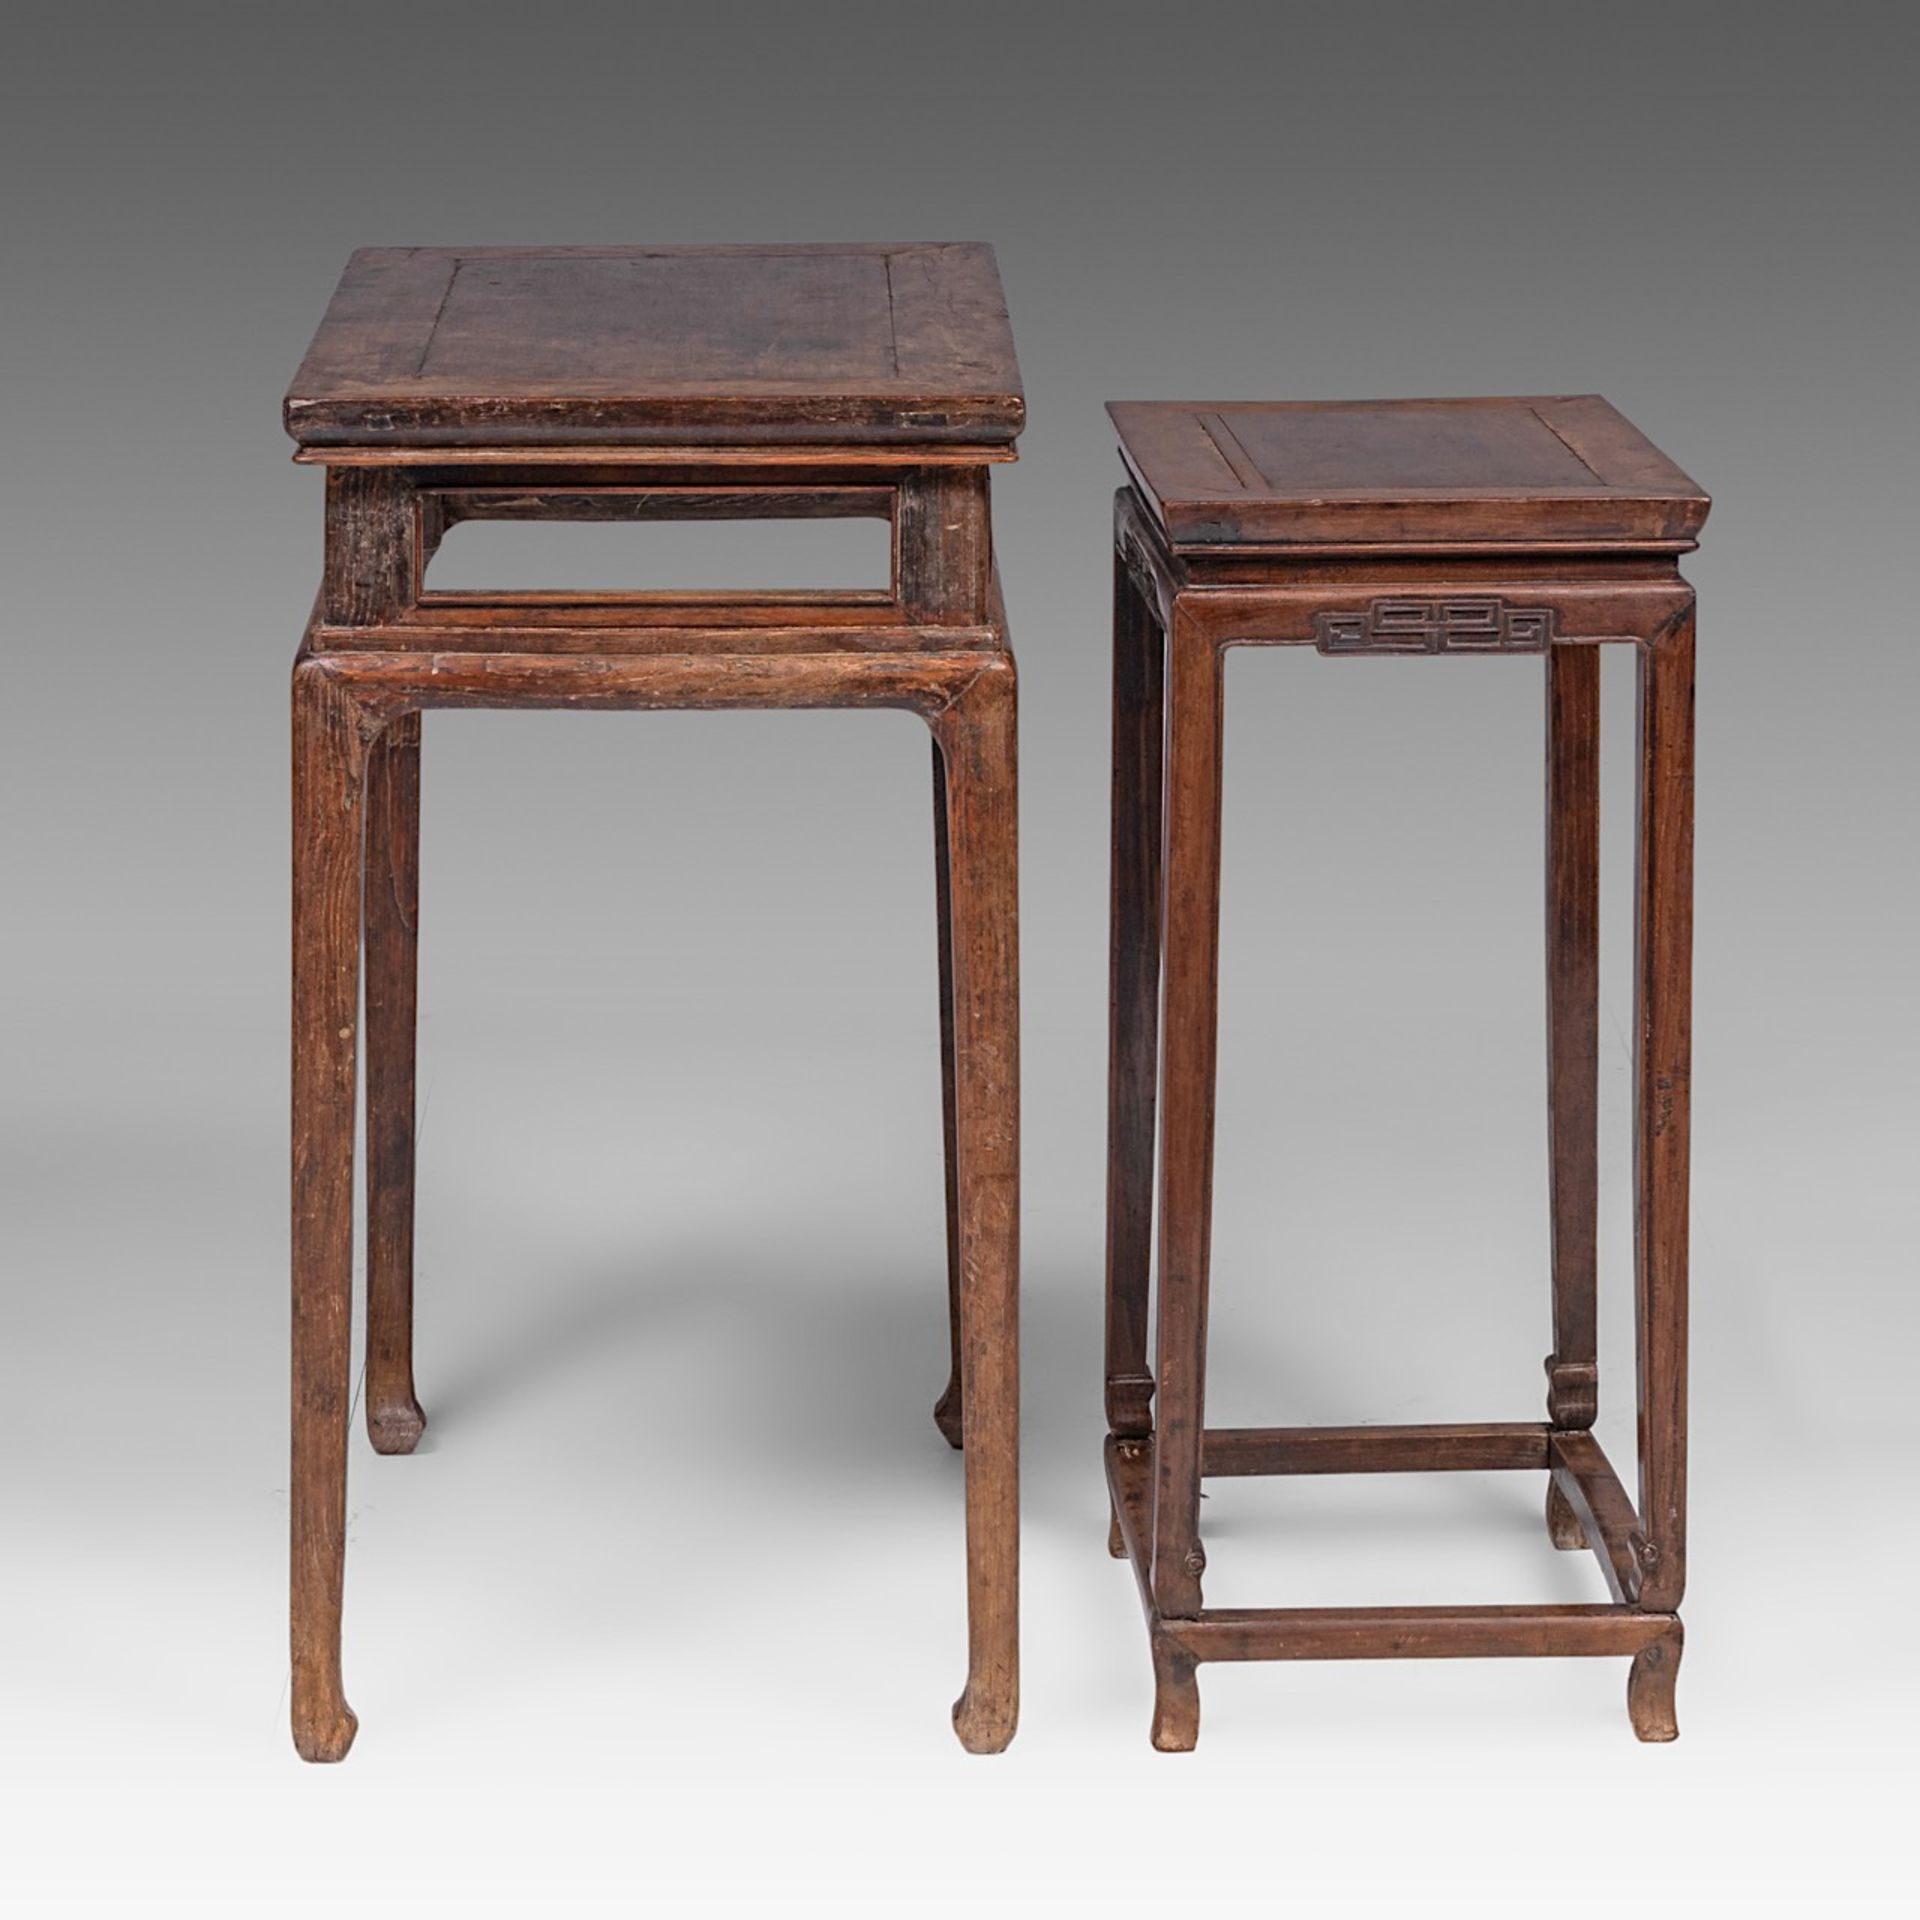 Two Chinese hardwood side tables, mid - late Qing dynasty, largest H 82 - 69 x 42 cm - Bild 3 aus 7